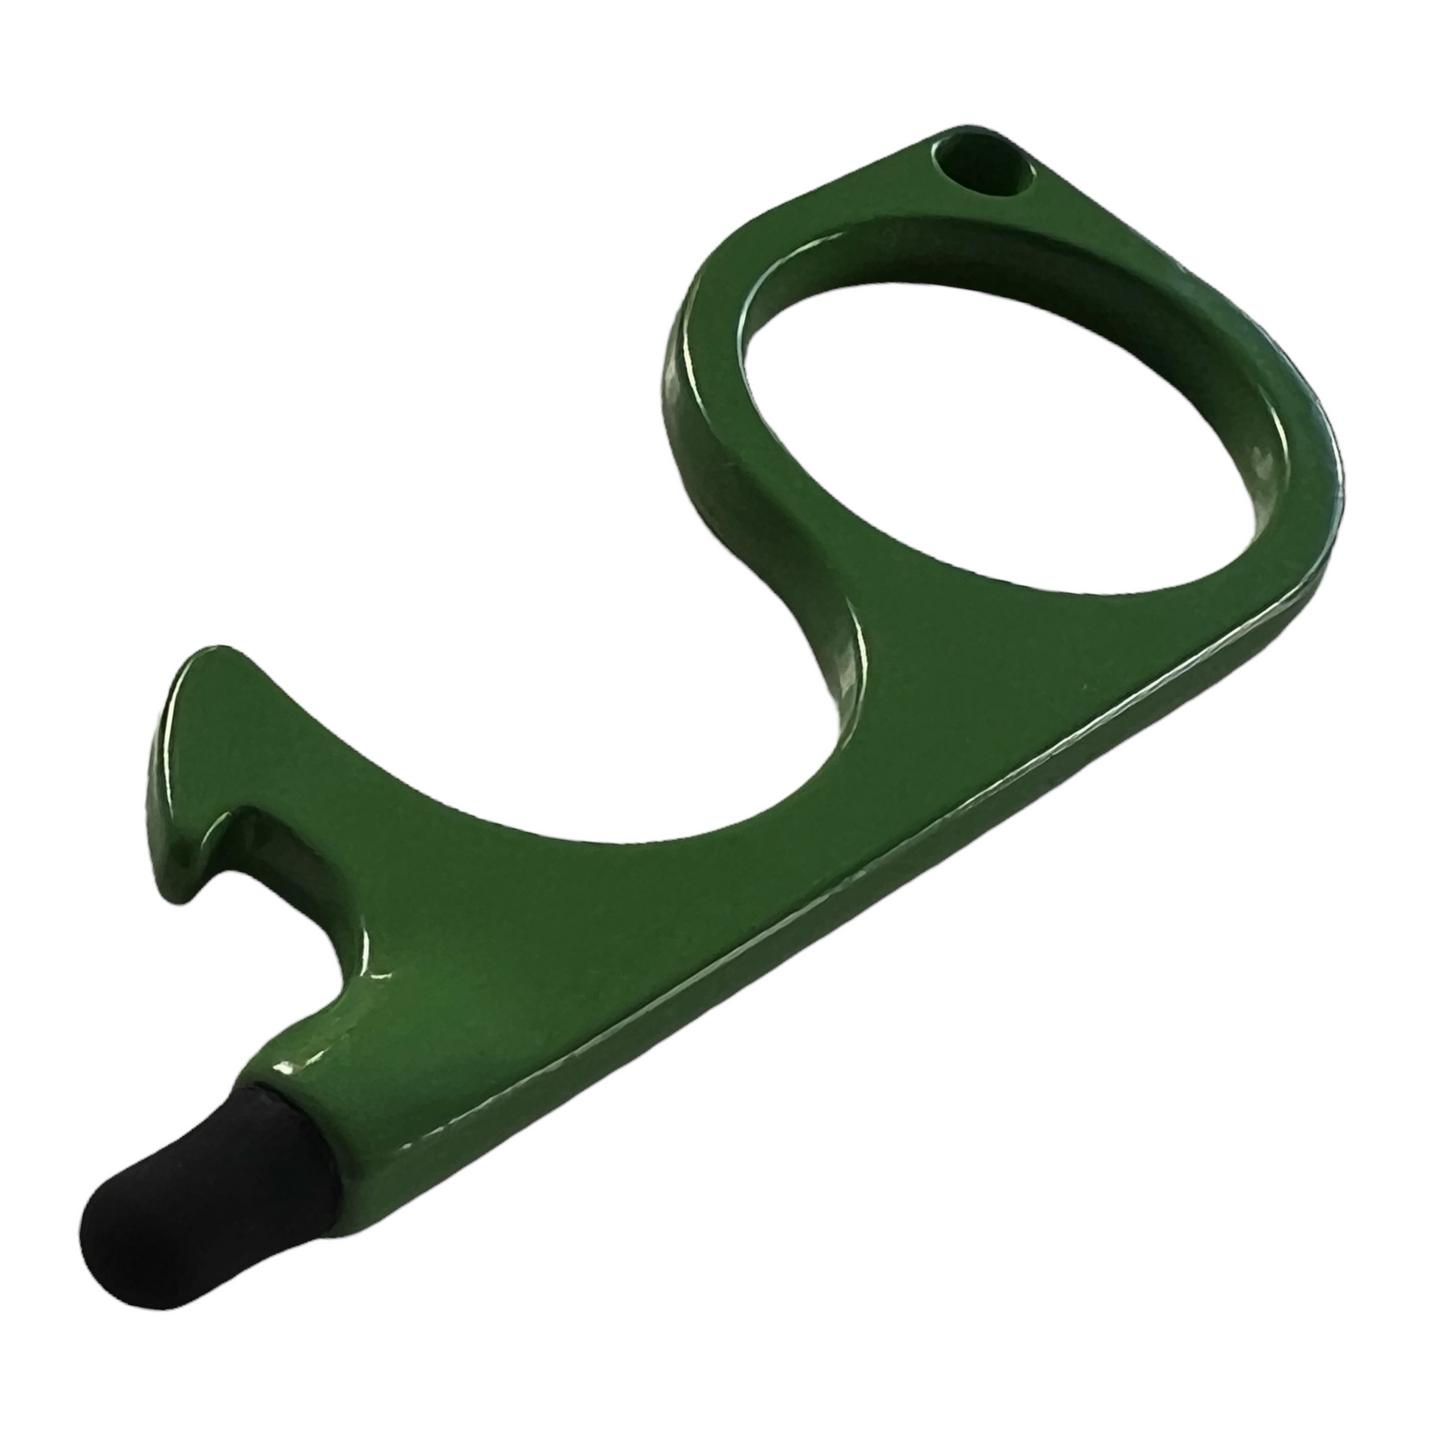 Keyring — No Touch Door Opener + tool Mobility & Accessibility SPIRIT SPARKPLUGS Forest Green No Clip 